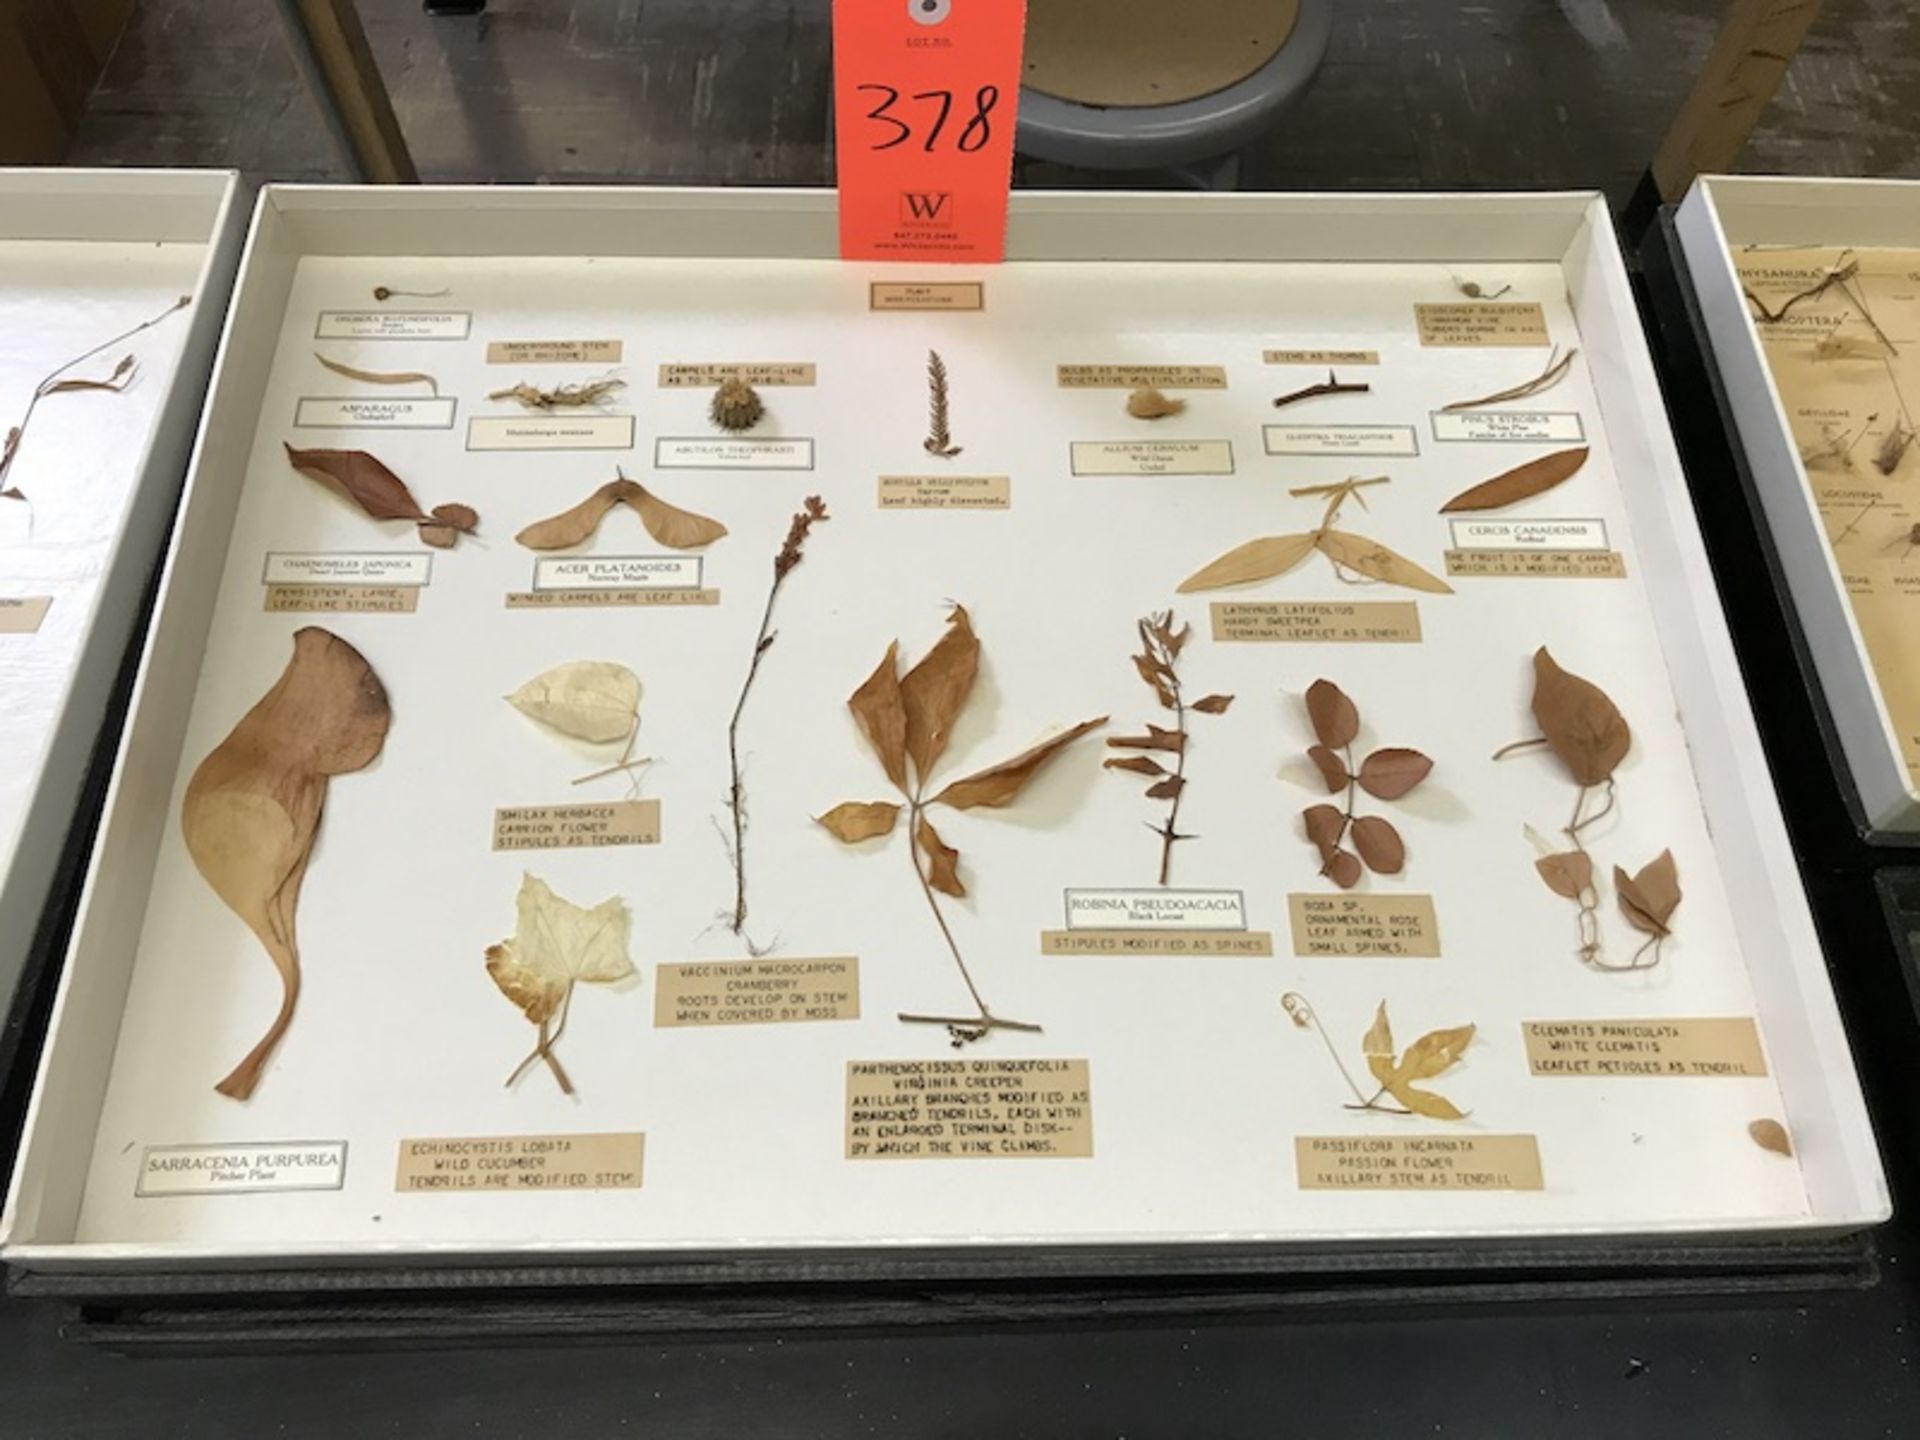 Plant and Insect Collections (Room 408)